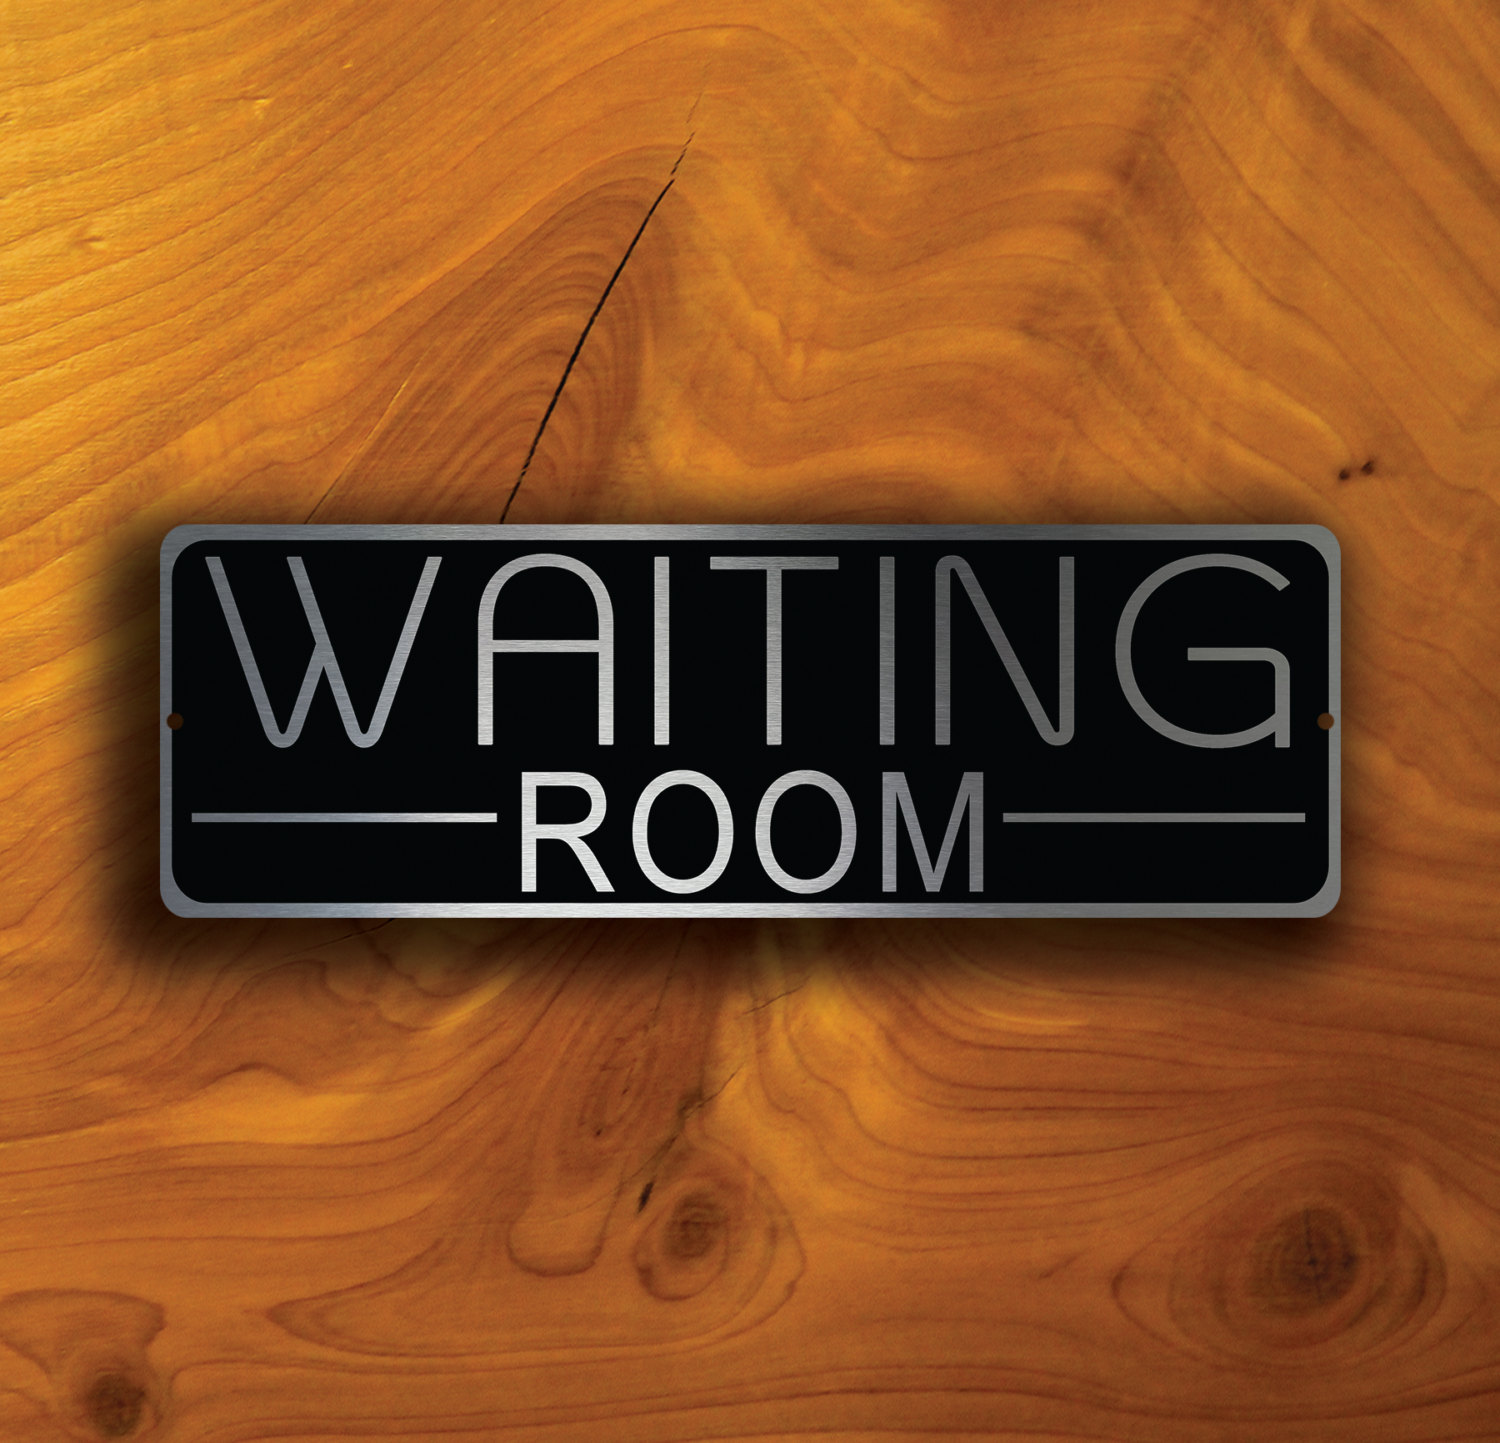 WAITING ROOM SIGN